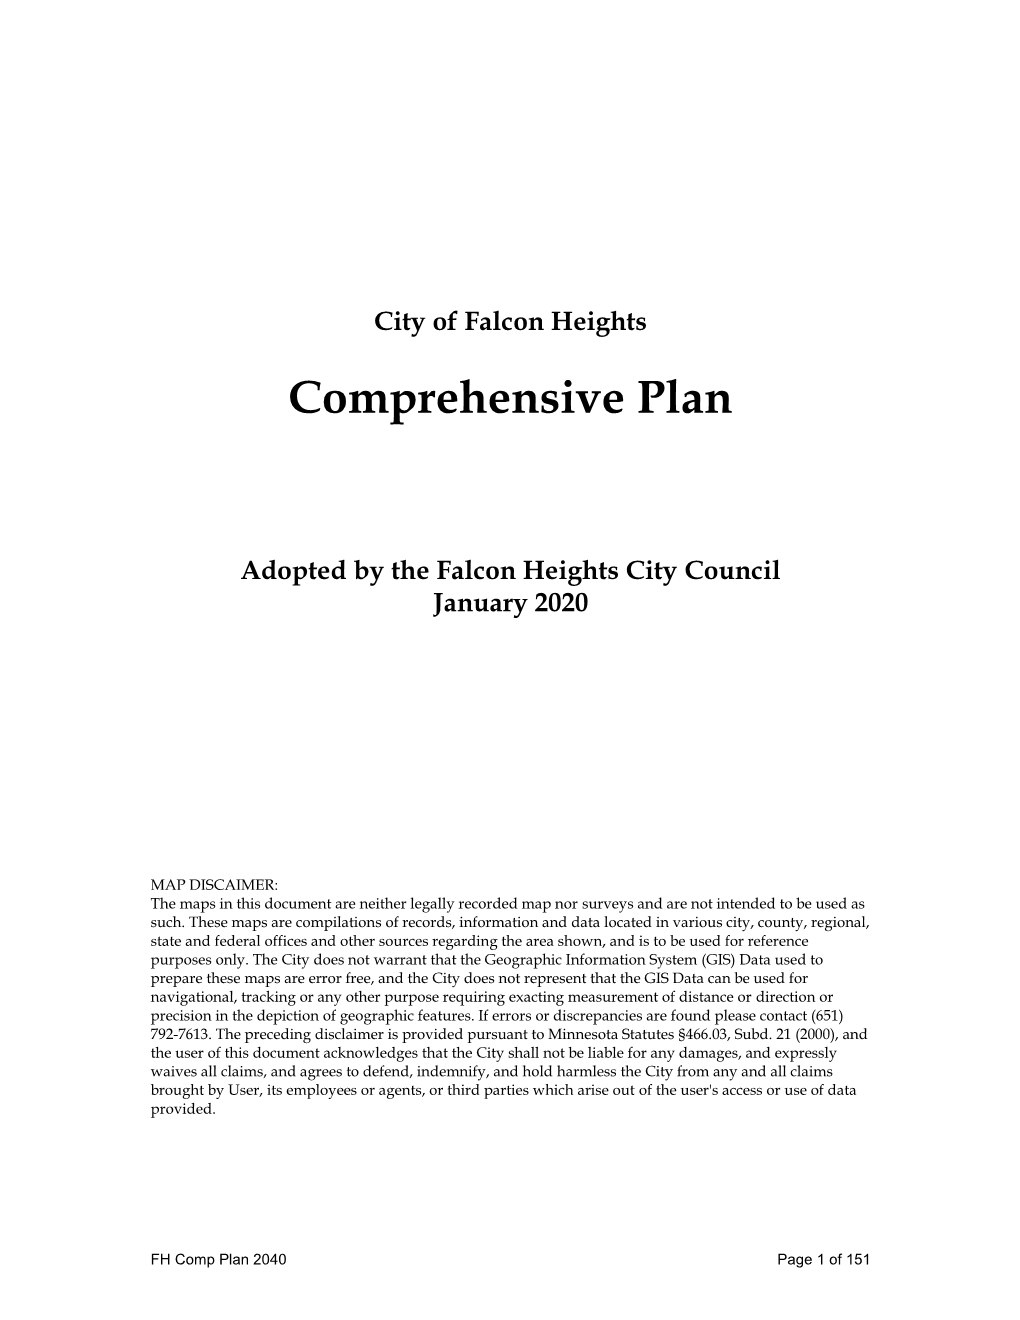 Adopted 2040 Comprehensive Plan